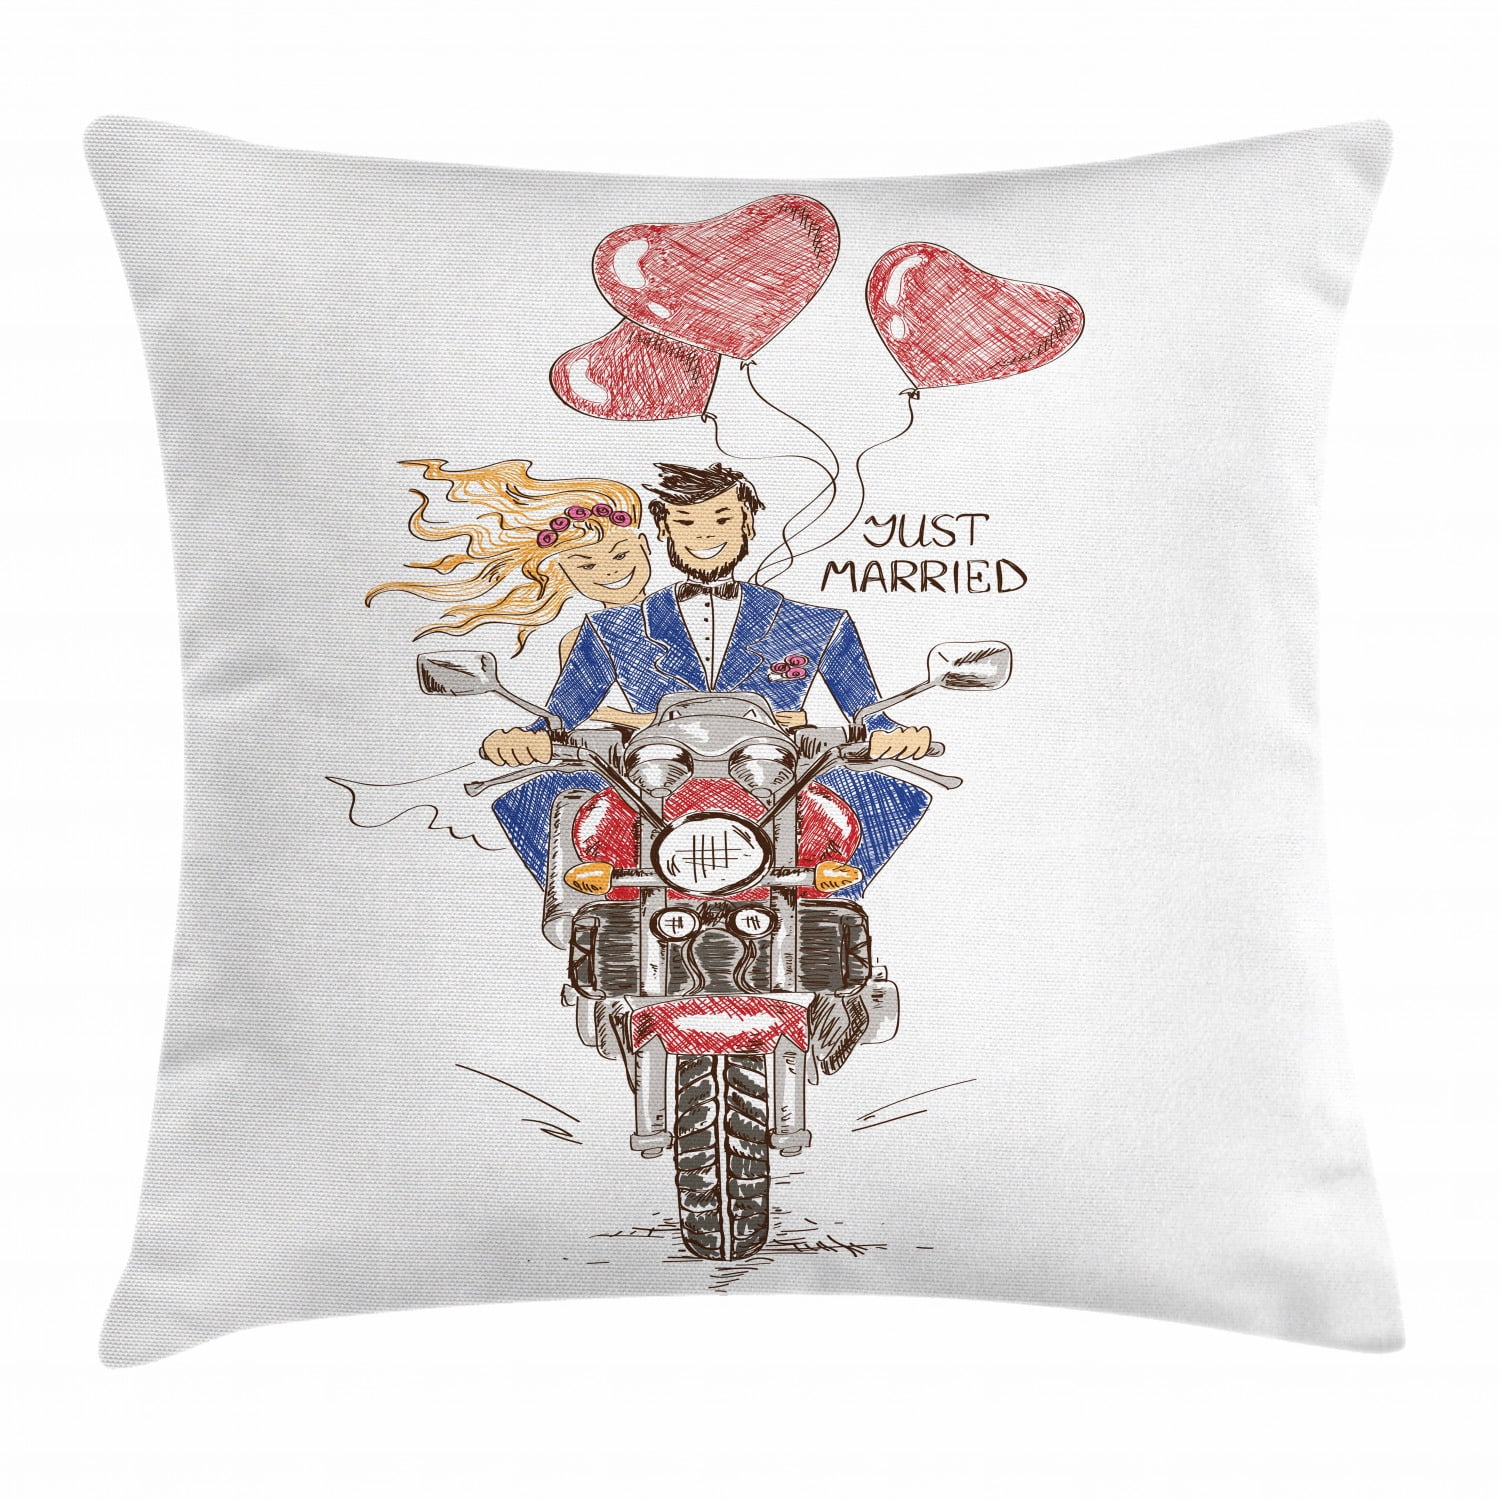 Motorcycle Throw Pillow Cushion Cover Sketch Of A Married Couple